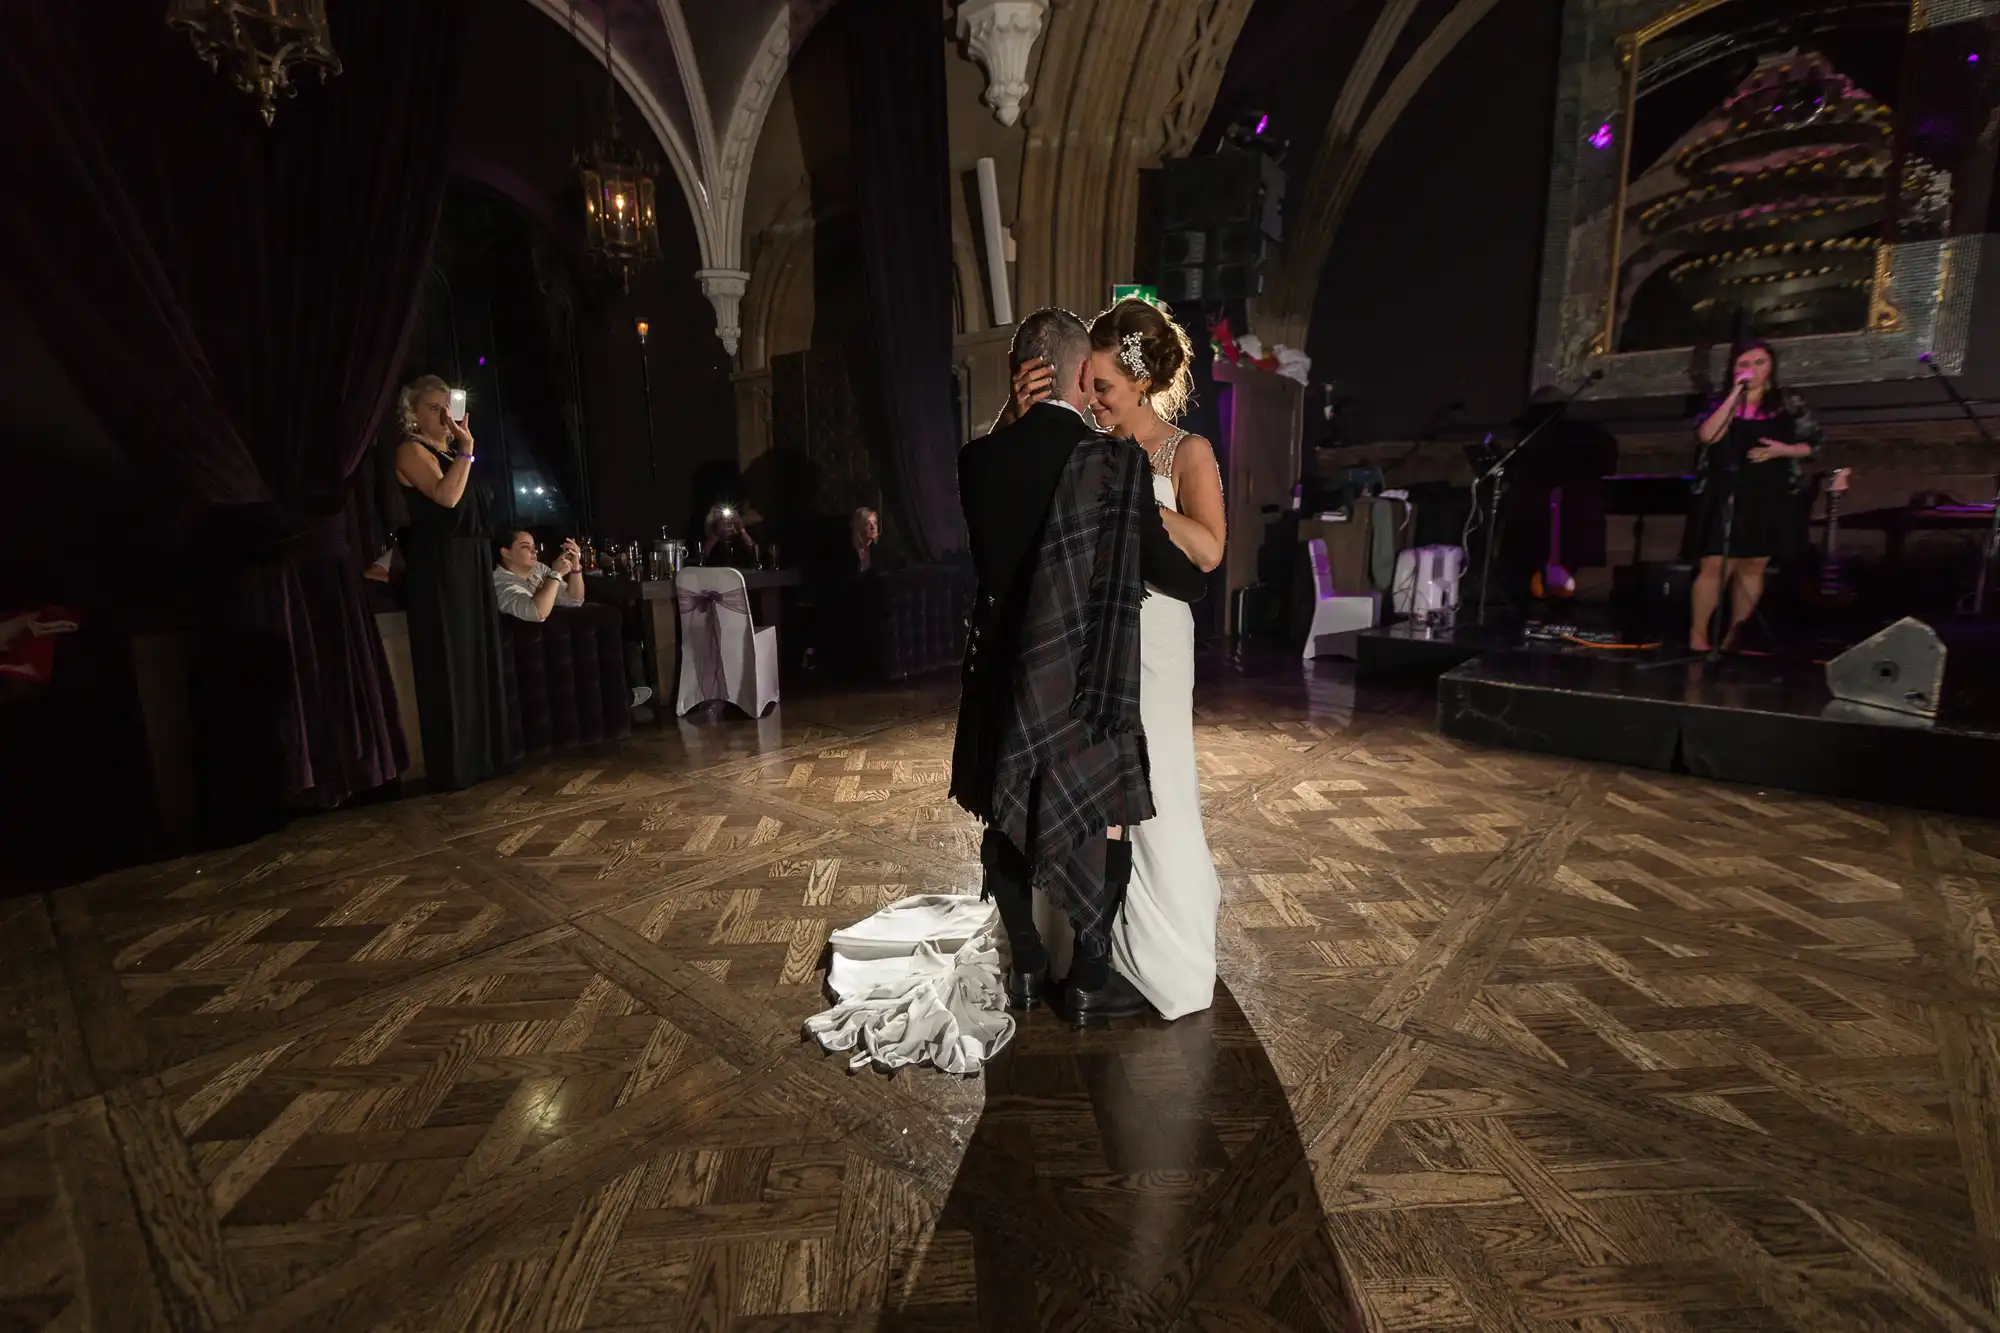 A bride and groom share a dance in a grand ballroom with onlookers and a live band in the background.